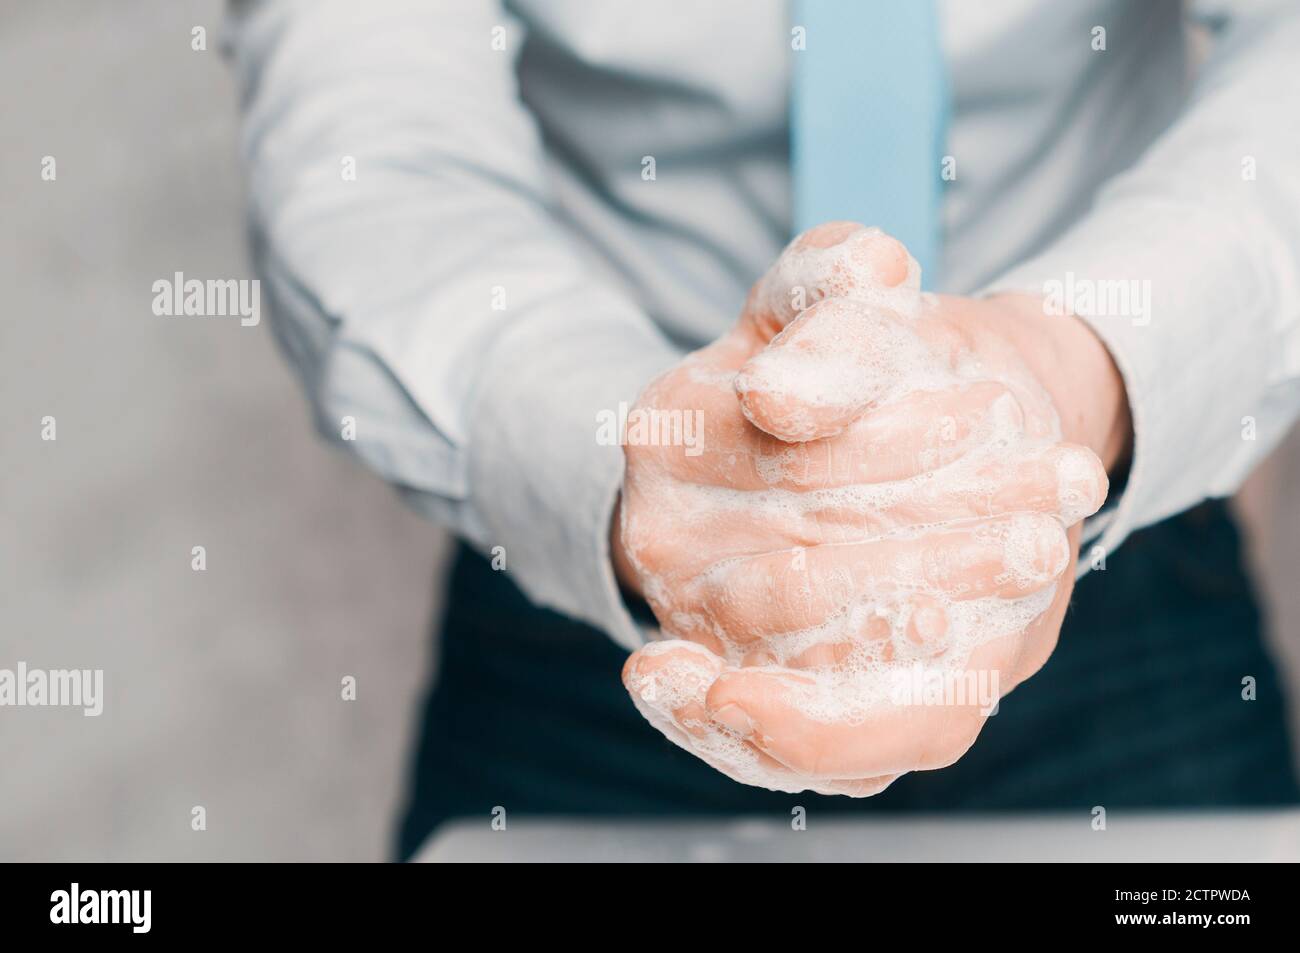 Businessman in blue shirt and tie soap his hands. Hand washing is important to avoid the risk of contagion from coronavirus. Stock Photo